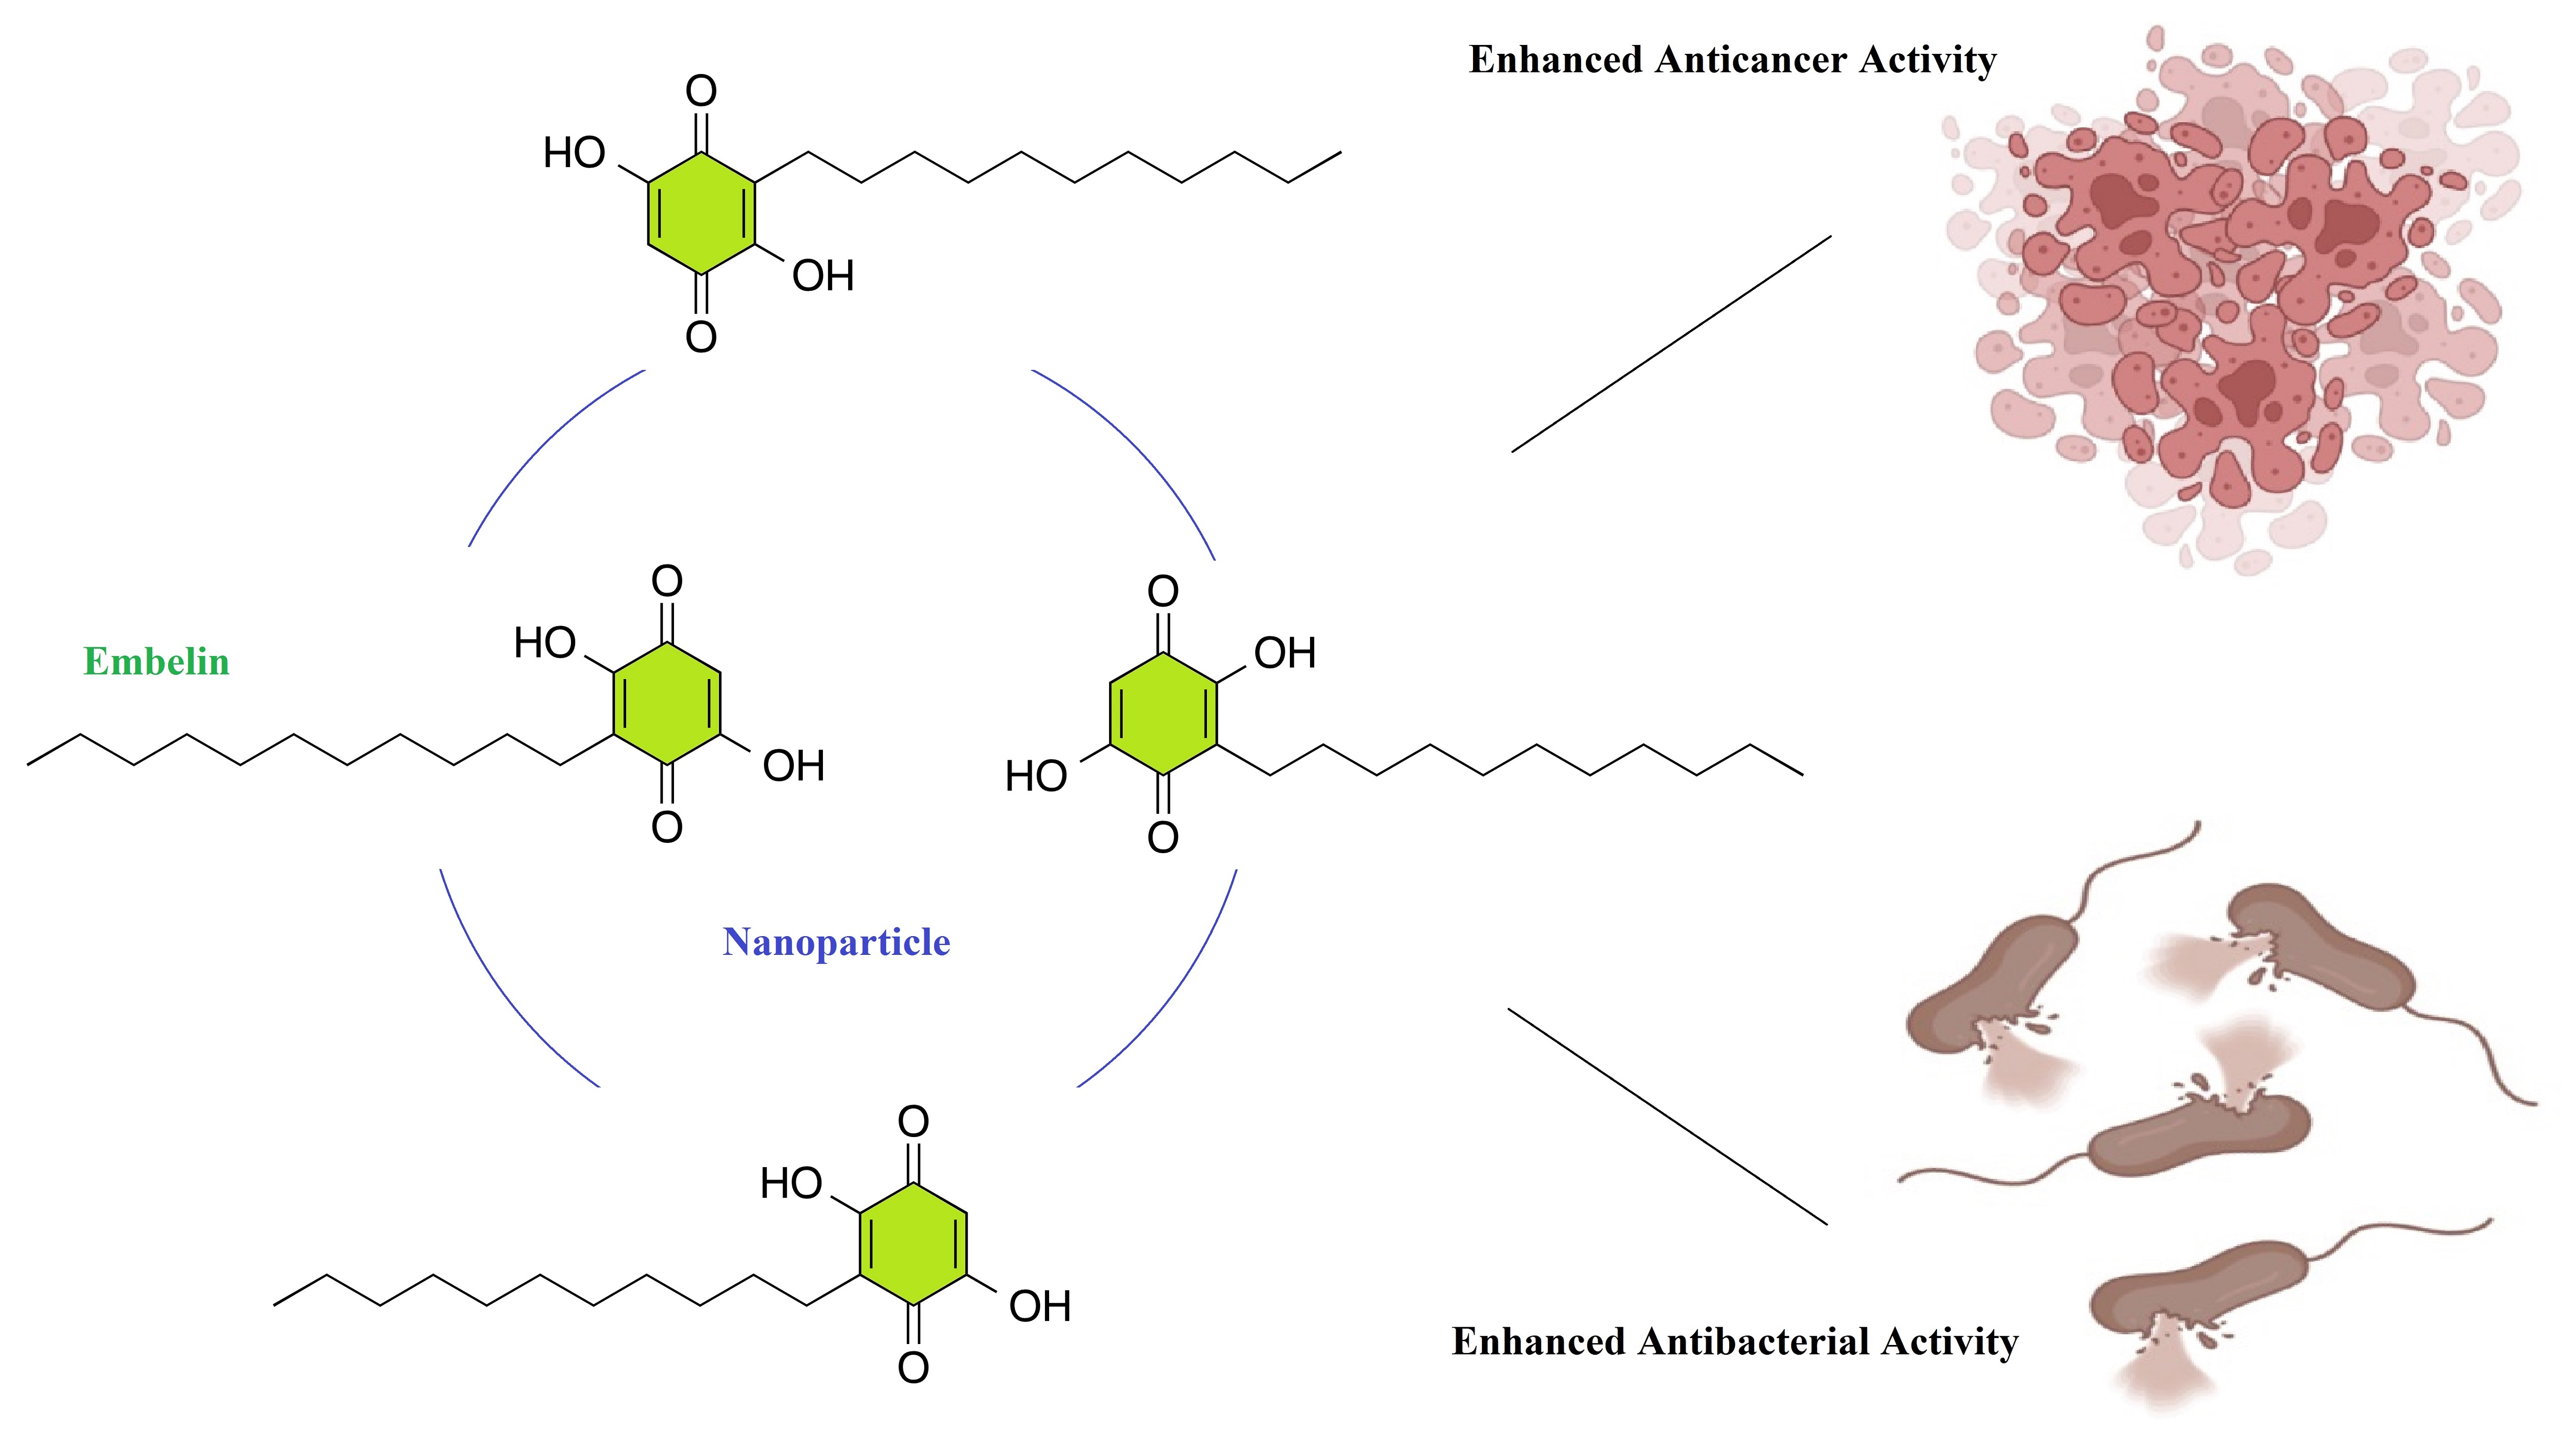 Anticancer and antibacterial activities of embelin: Micro and nano aspects 